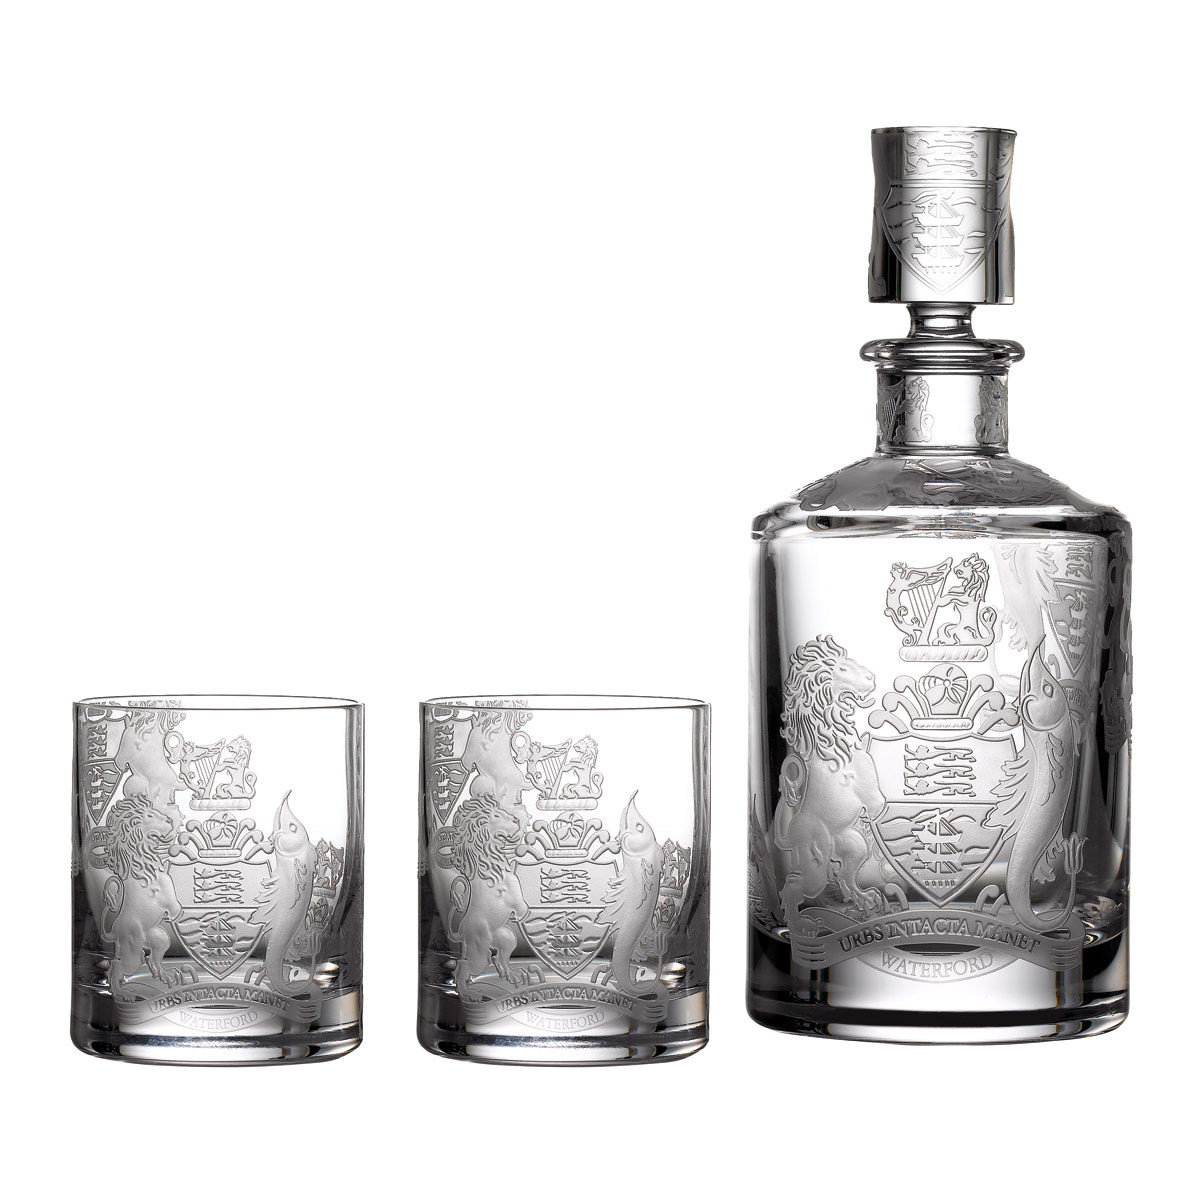 Waterford Crystal Master Craft Crest Whiskey Decanter and Set of 4 Tumblers, Limited Edition